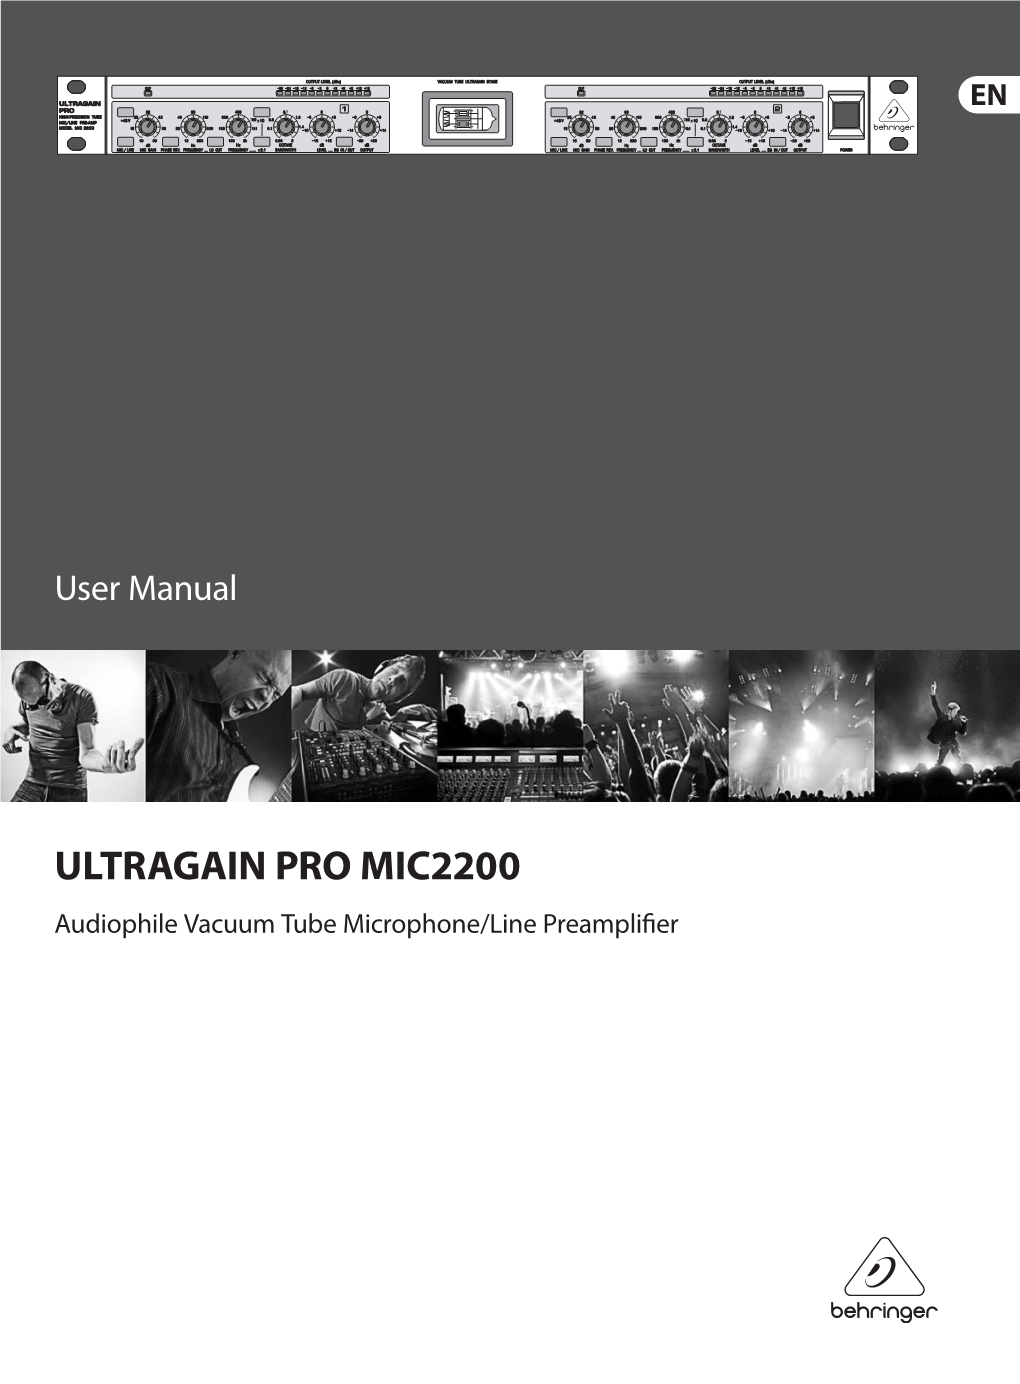 ULTRAGAIN PRO MIC2200 Audiophile Vacuum Tube Microphone/Line Preamplifier 2 ULTRAGAIN PRO MIC2200 User Manual Table of Contents Thank You